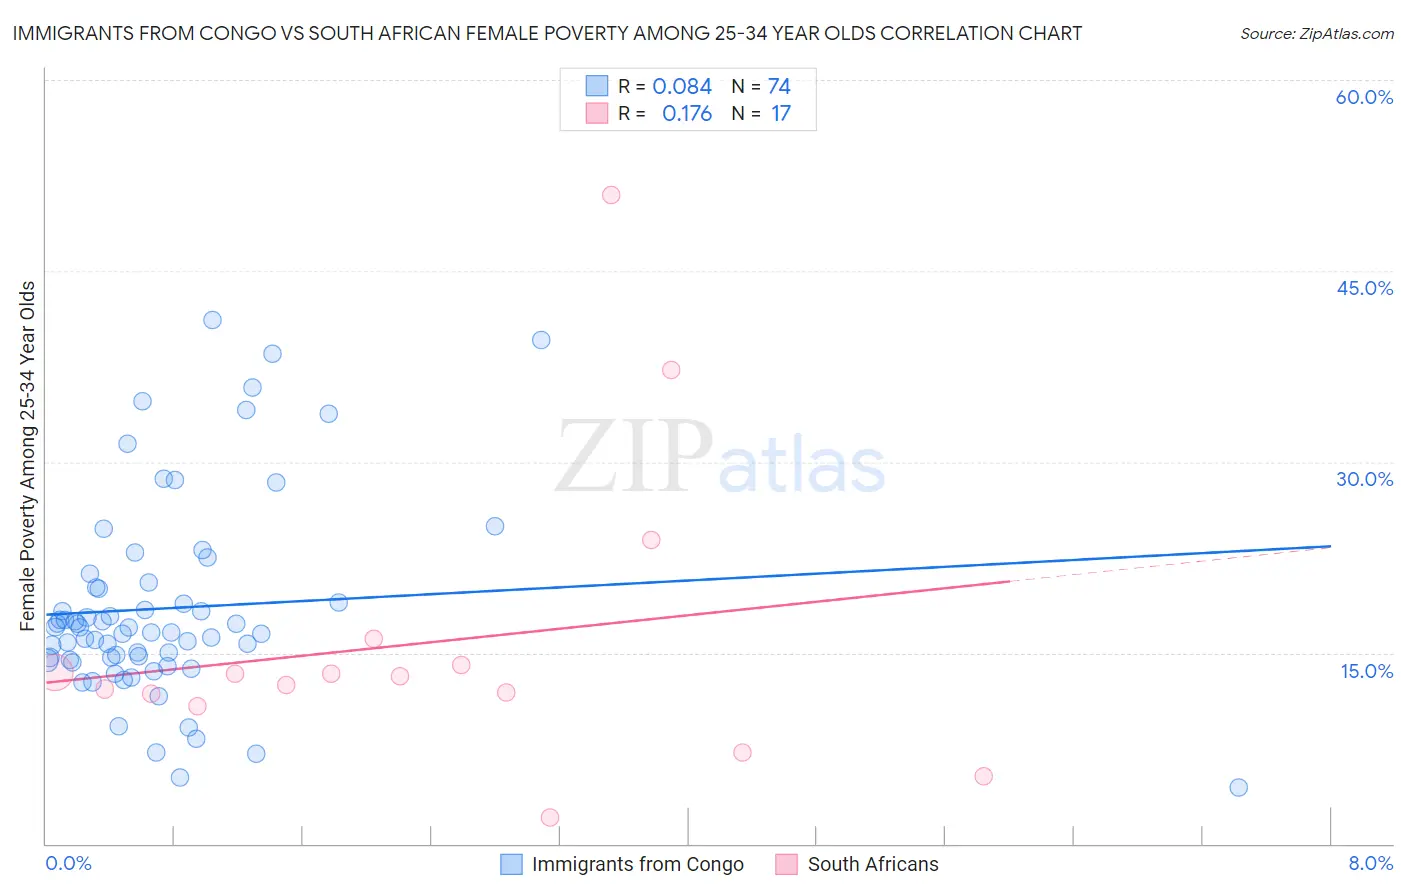 Immigrants from Congo vs South African Female Poverty Among 25-34 Year Olds